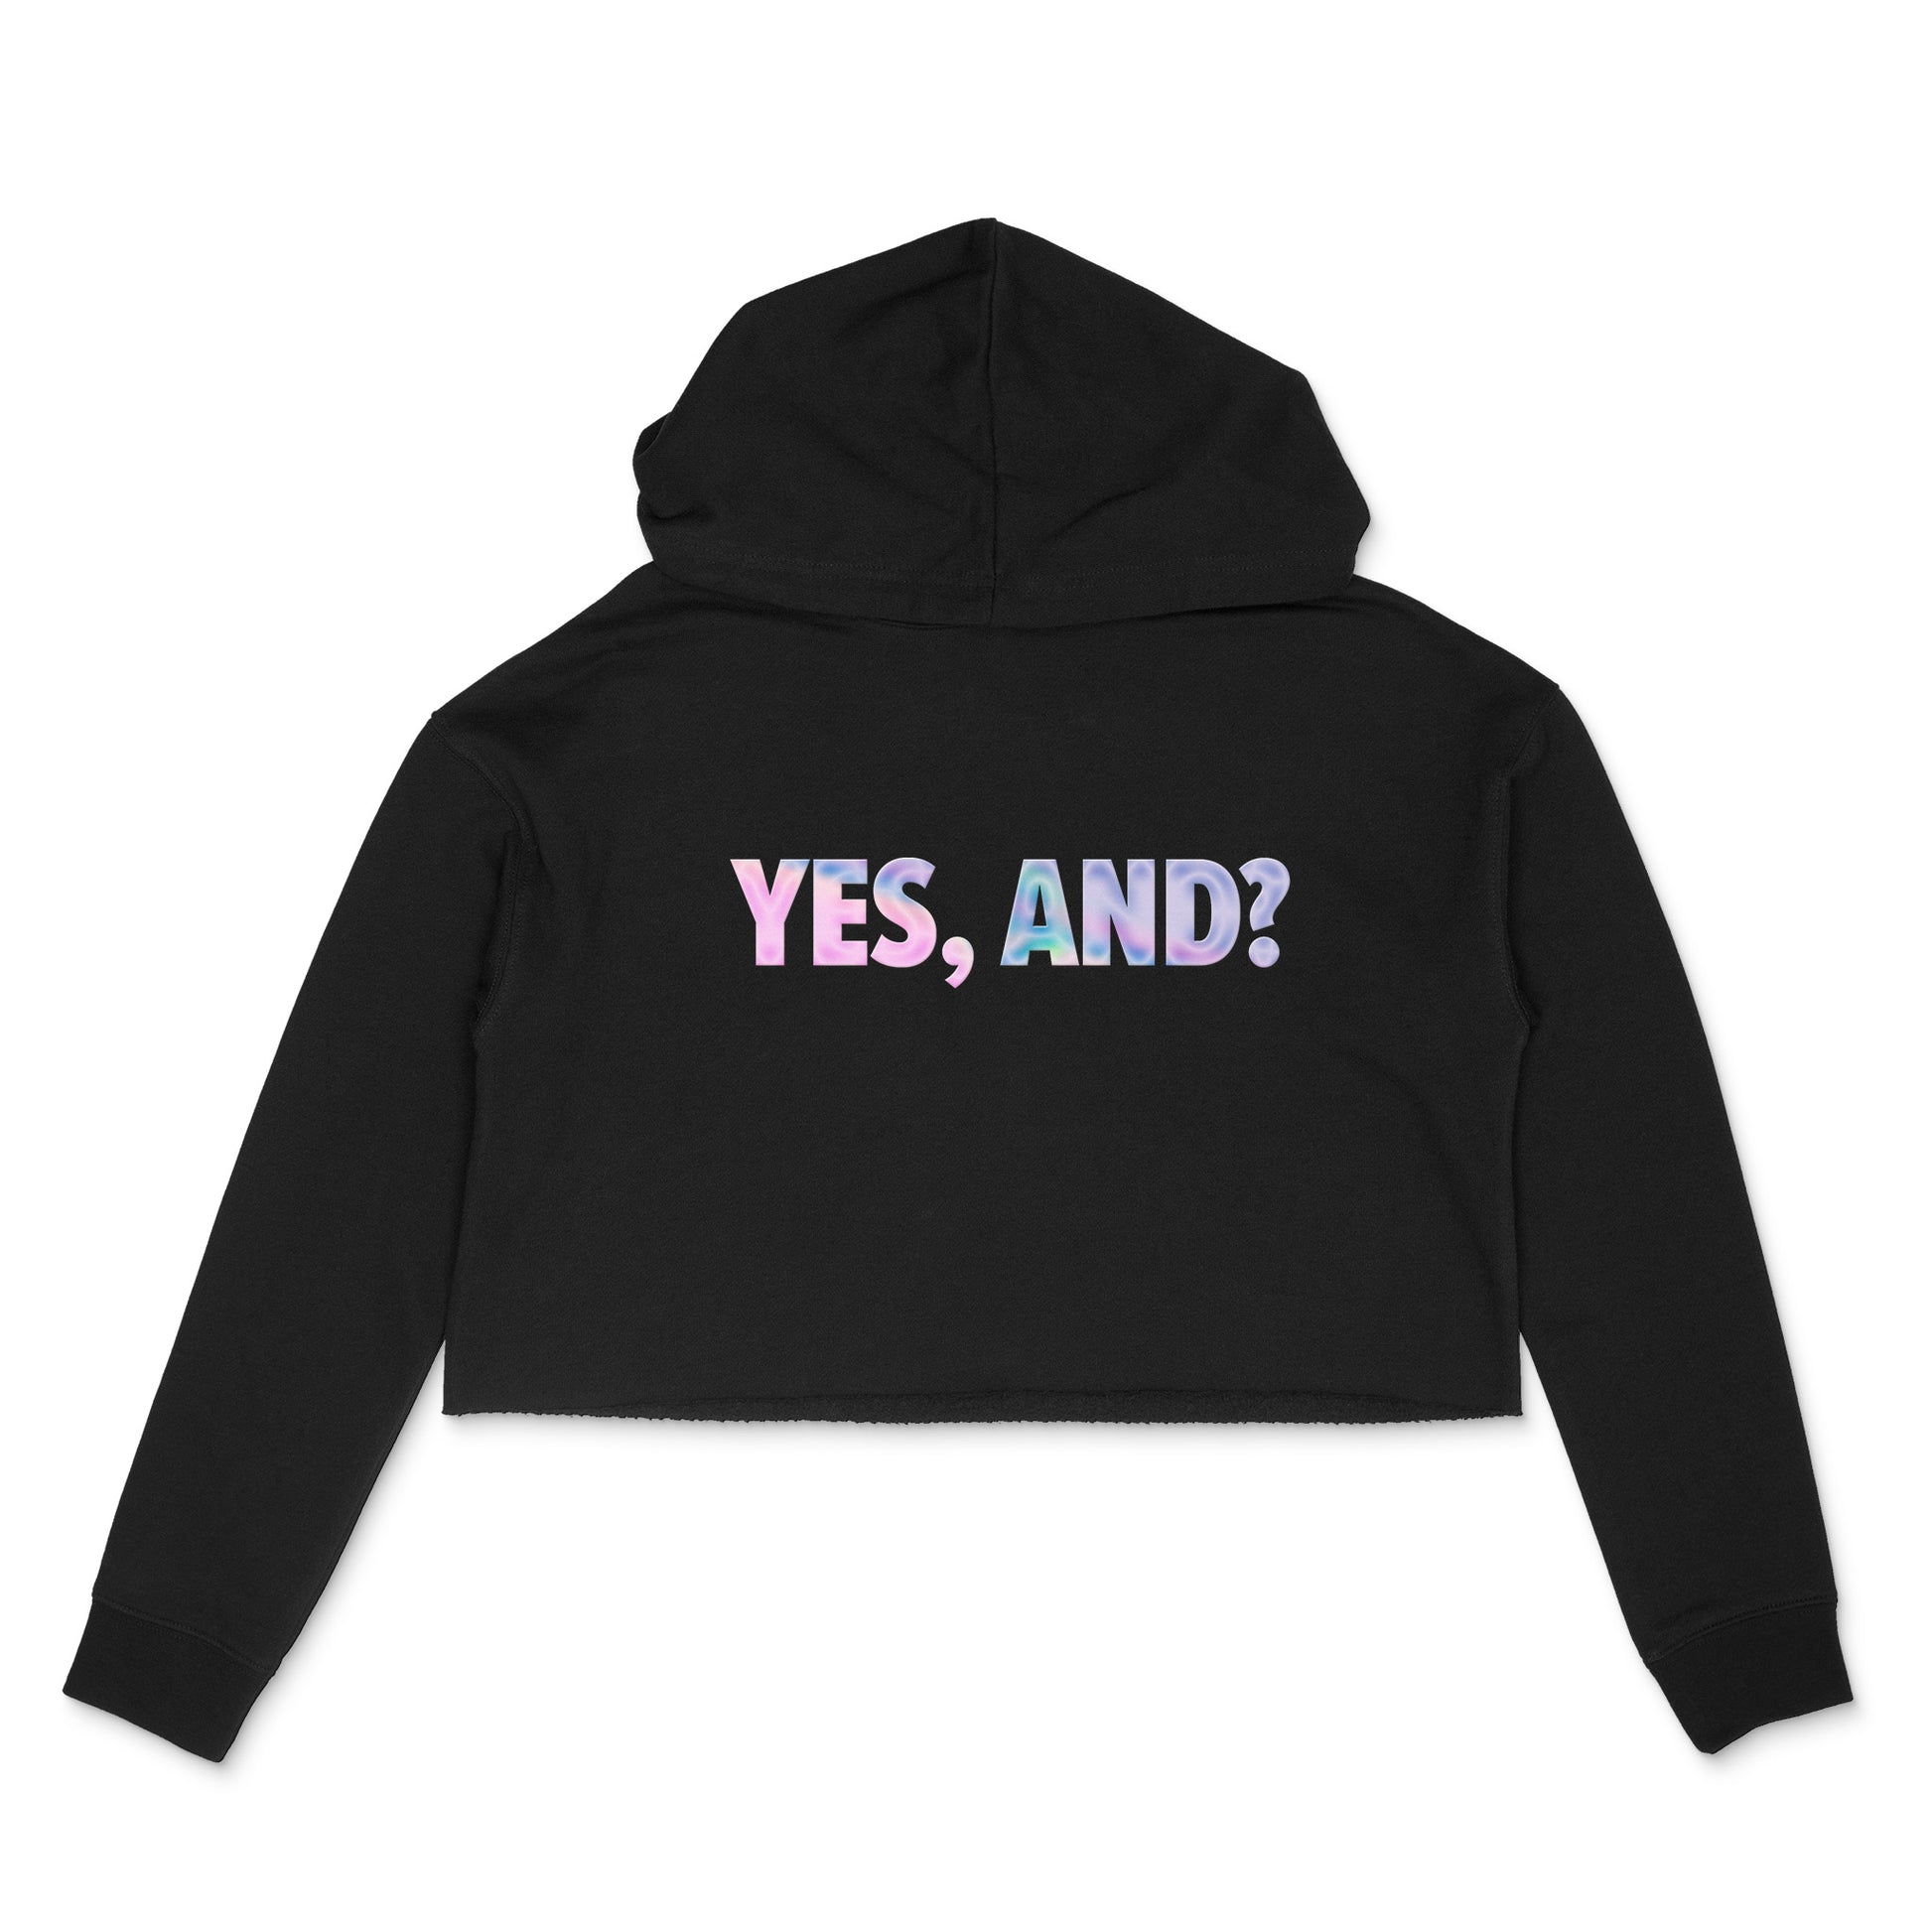 Custom text black cropped hooded sweatshirt with Yes, And? in holo pearl tall text by BBJ / Glitter Garage